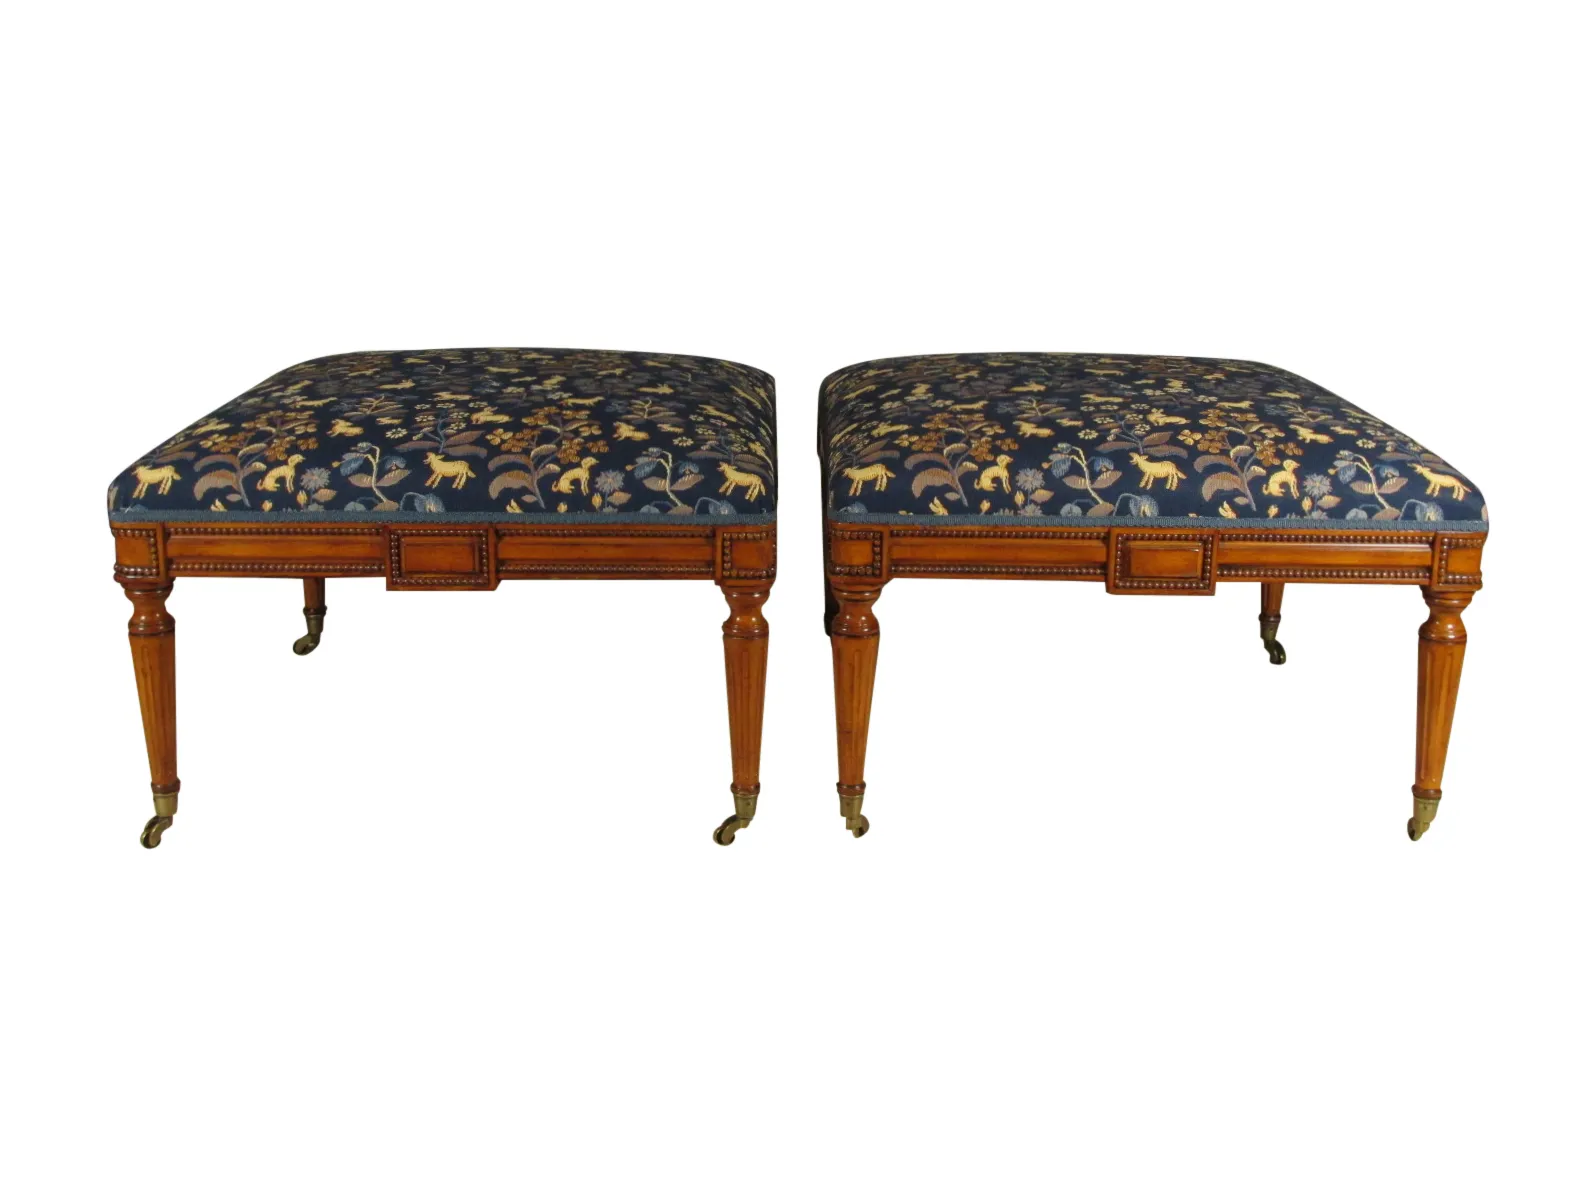 Louis XVI Style Ottomans - Set of 2 - The Barn at 17 Antiques - Blue